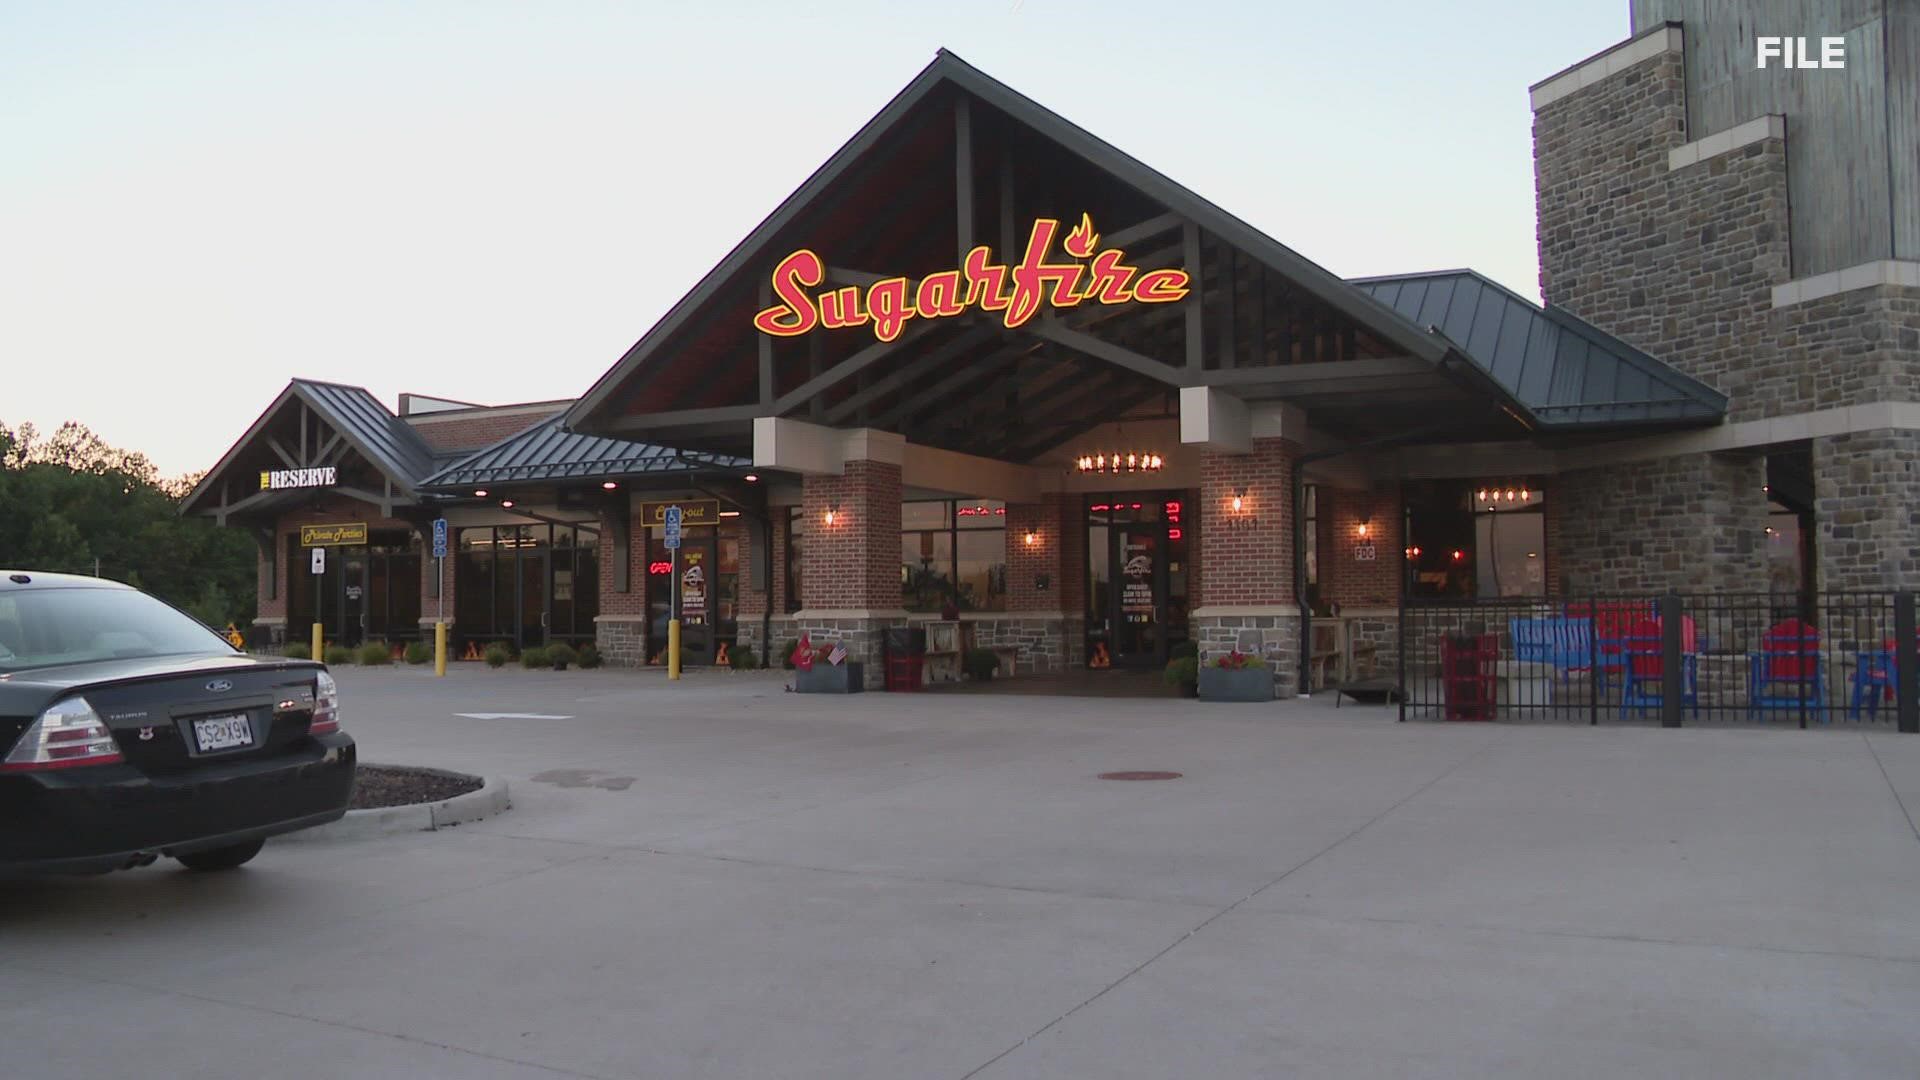 Sugarfire Smokehouse now has 15 locations in 5 states. The restaurant is celebrating with specials and giveaway for 10 days until the anniversary.